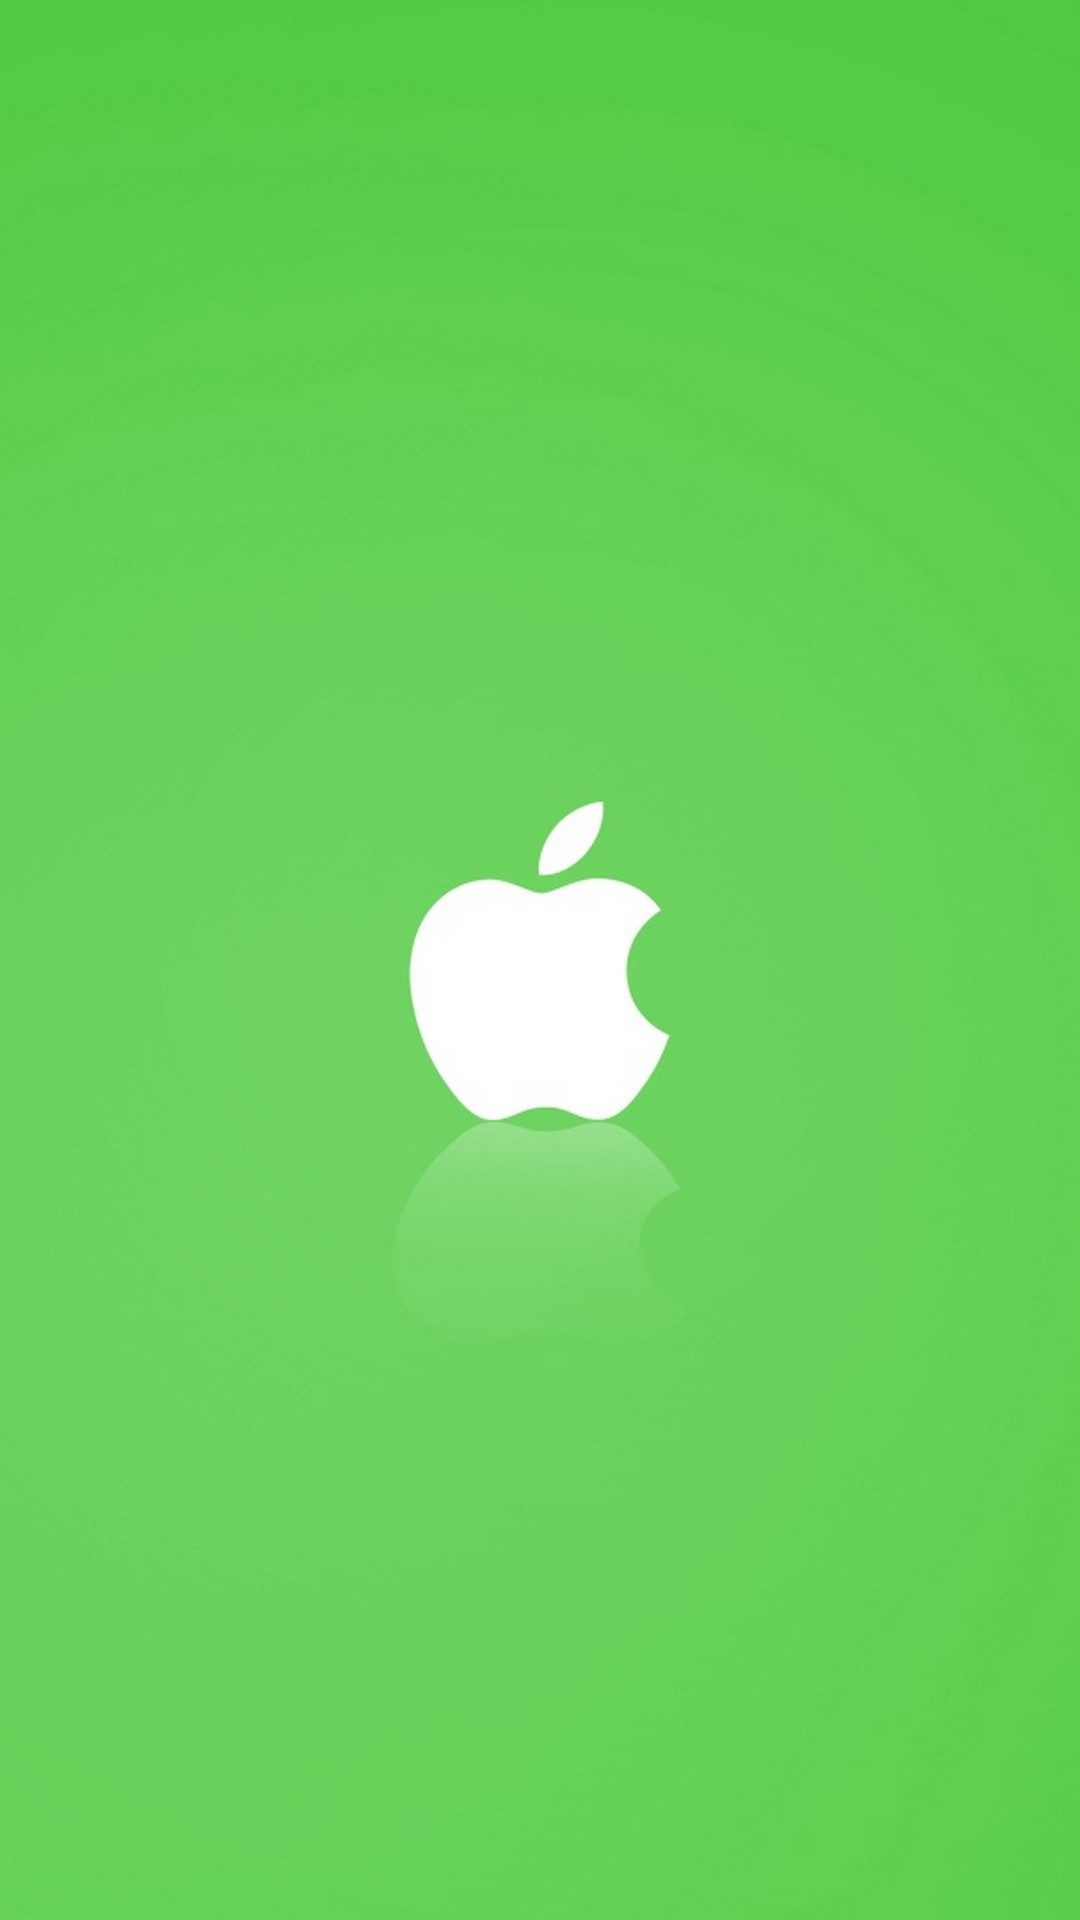 Green i Phones Wallpaper with high-resolution 1080x1920 pixel. Download all Mobile Wallpapers and Use them as wallpapers for your iPhone, Tablet, iPad, Android and other mobile devices